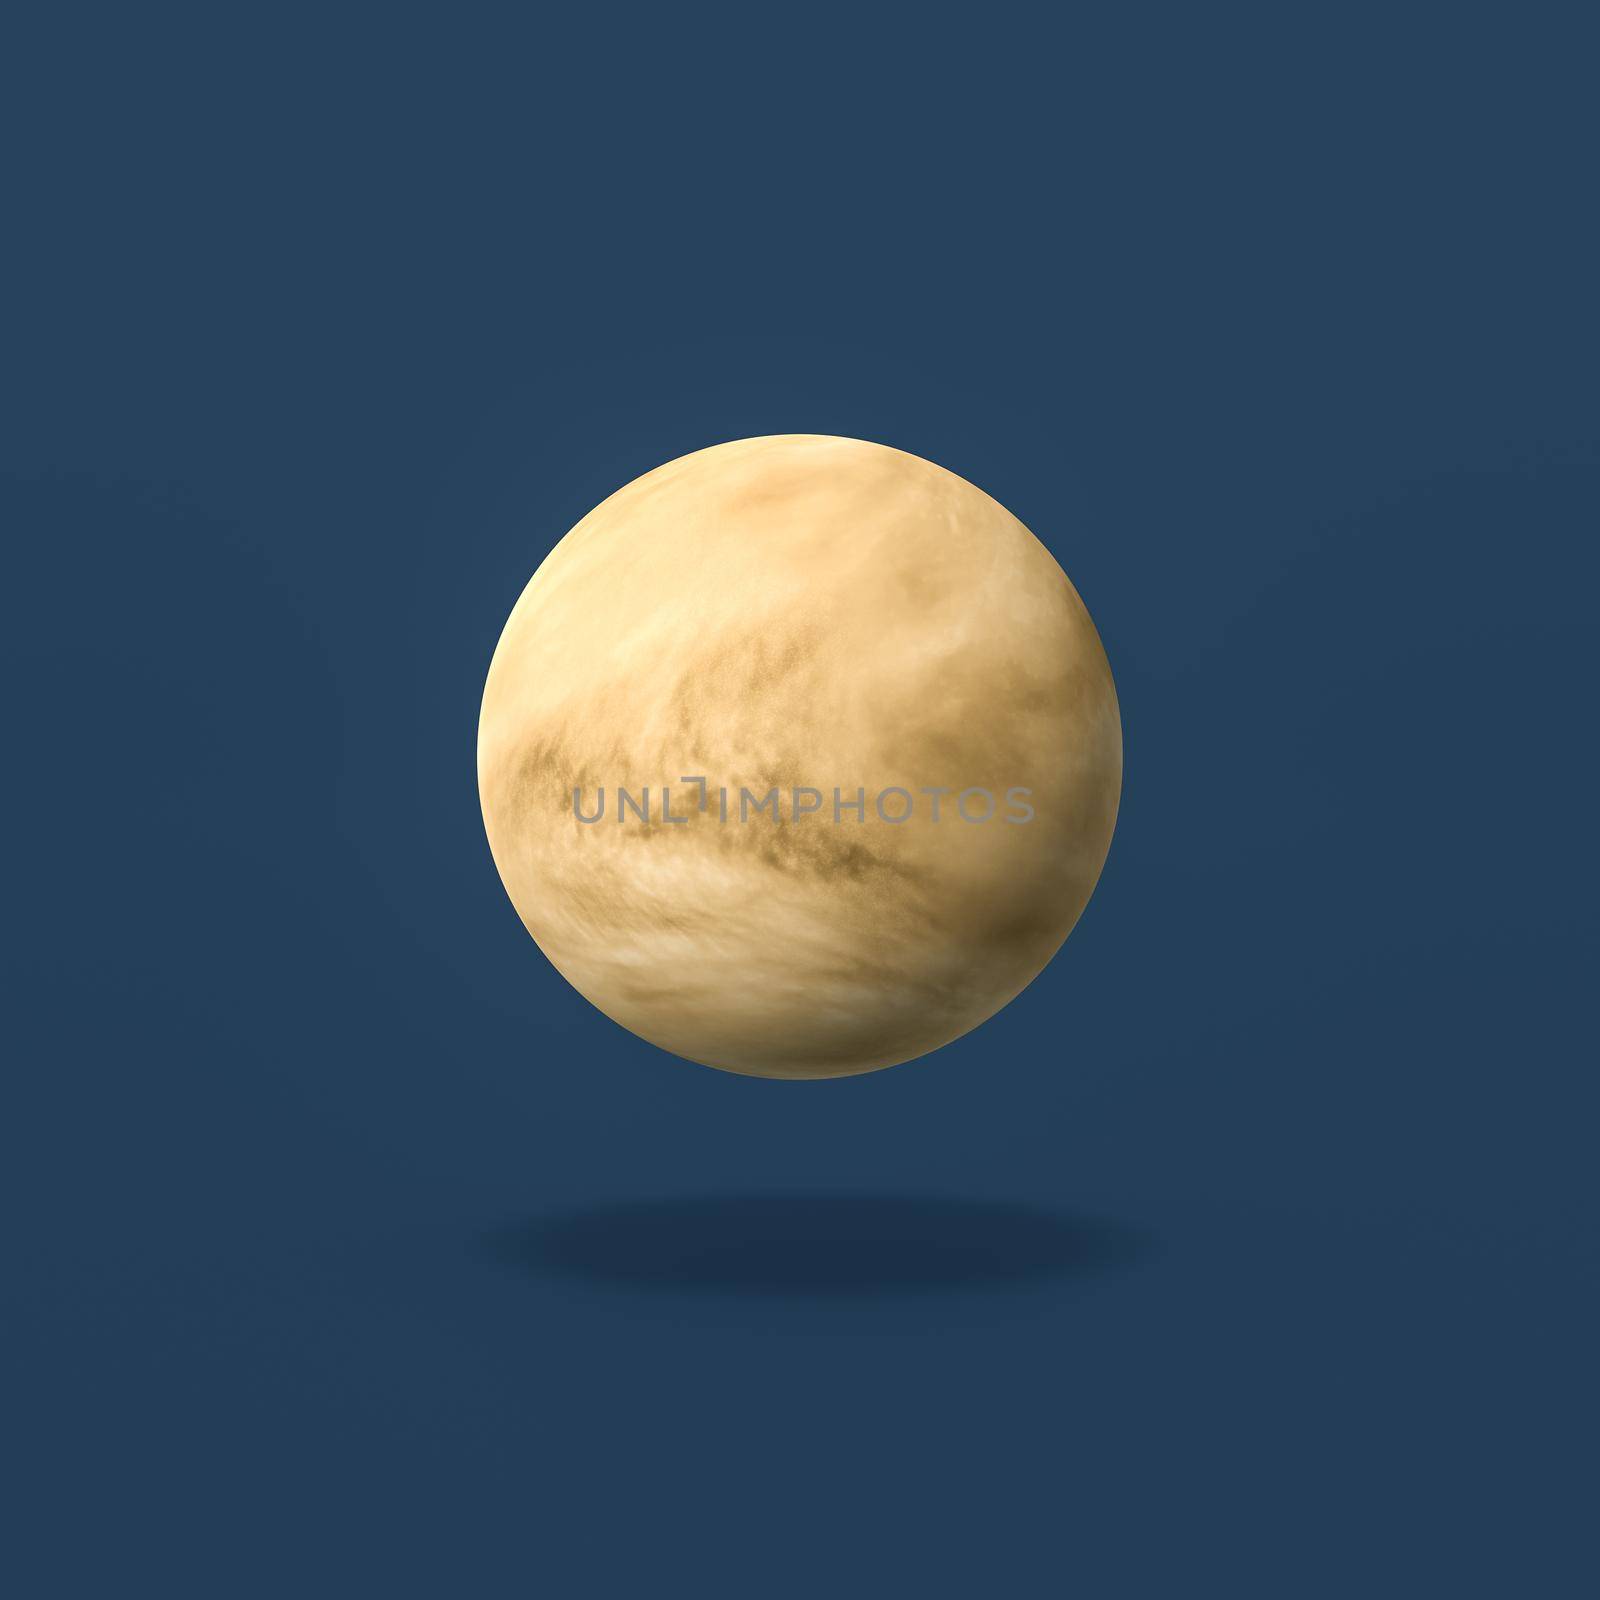 Venus Planet Isolated on Flat Blue Background with Shadow 3D Illustration. Texture from solarsystemscope.com